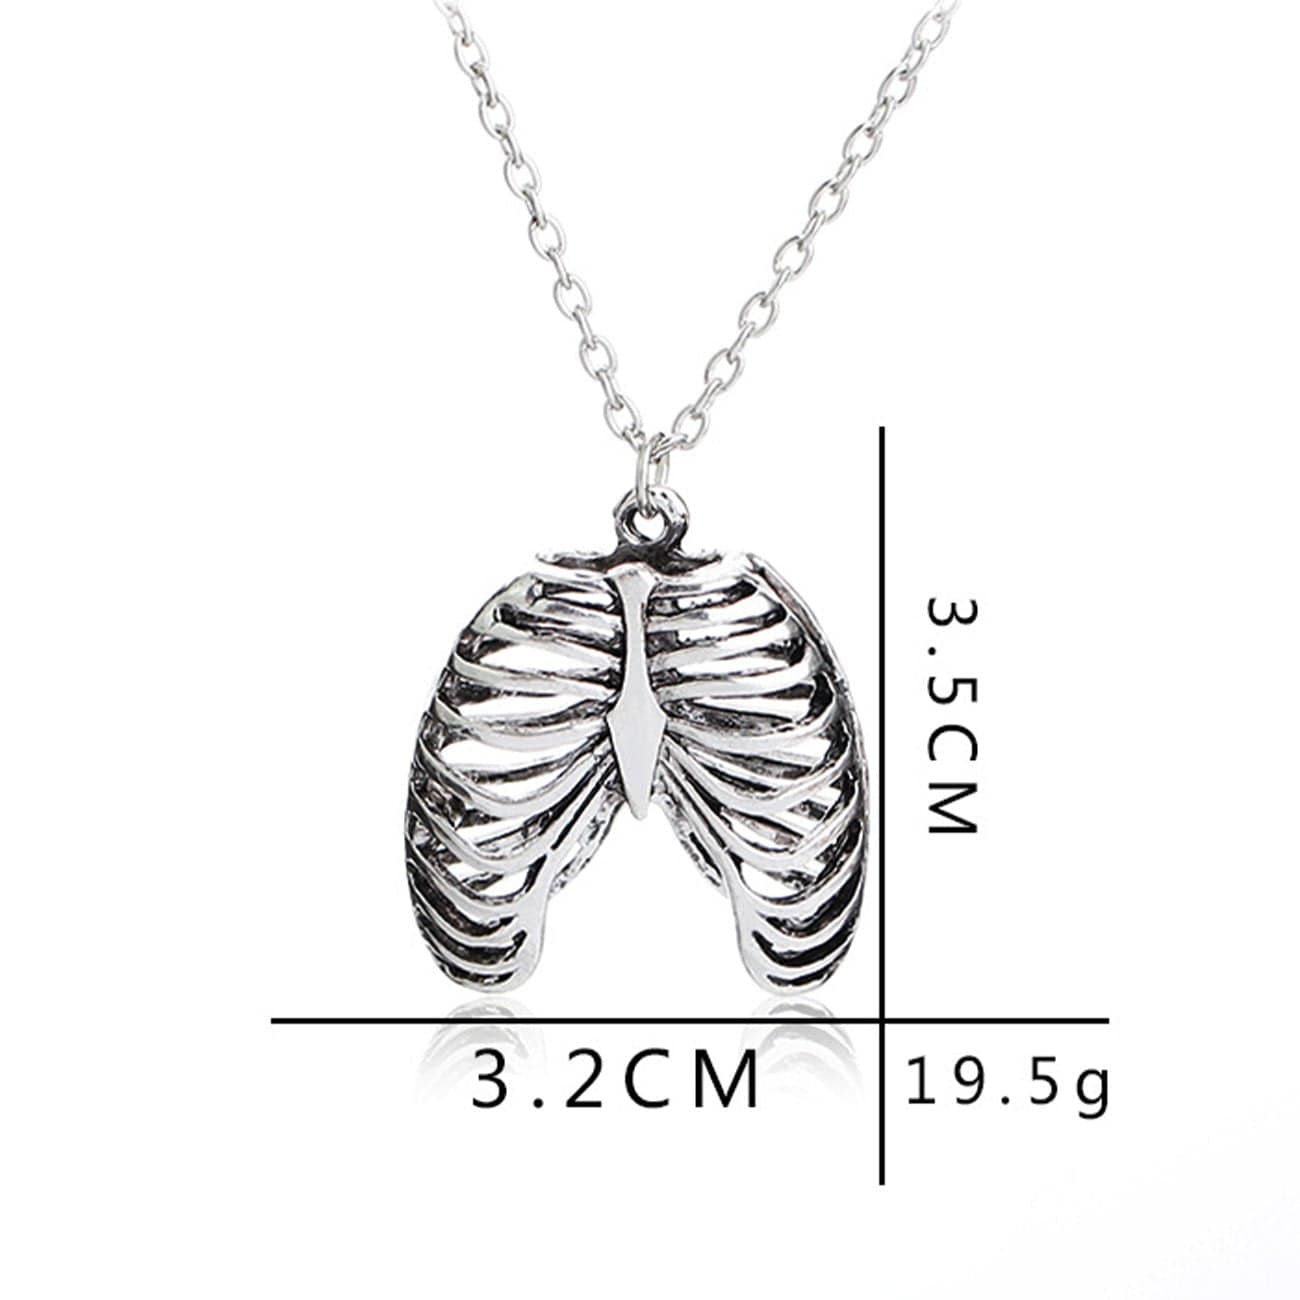 Human Thoracic Skeleton Necklace Streetwear Brand Techwear Combat Tactical YUGEN THEORY